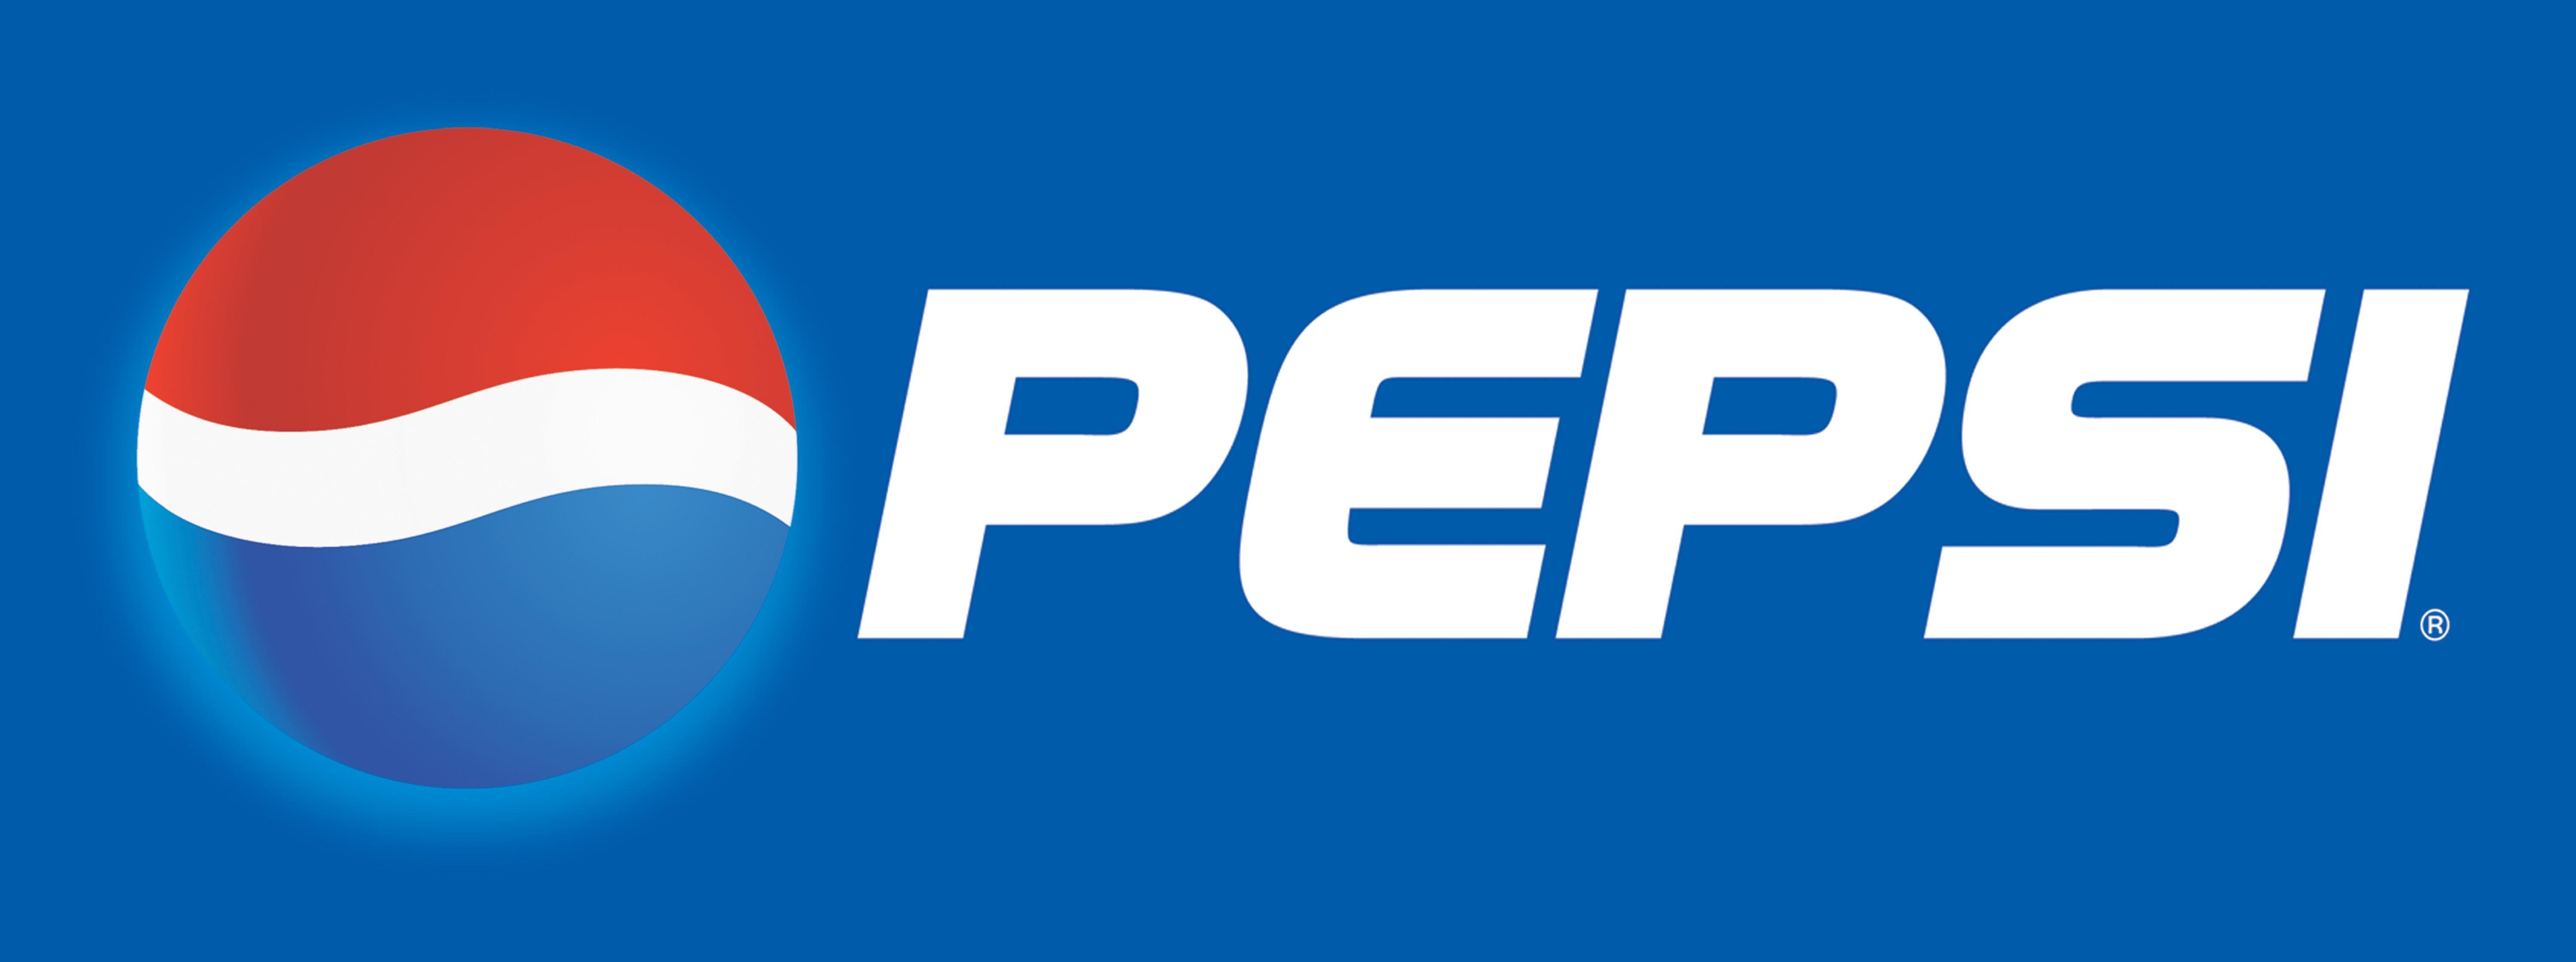 PepsiCo Brand Logo - Dividends Forever! Why I Am Buying Pepsi Inc. NYSE:PEP